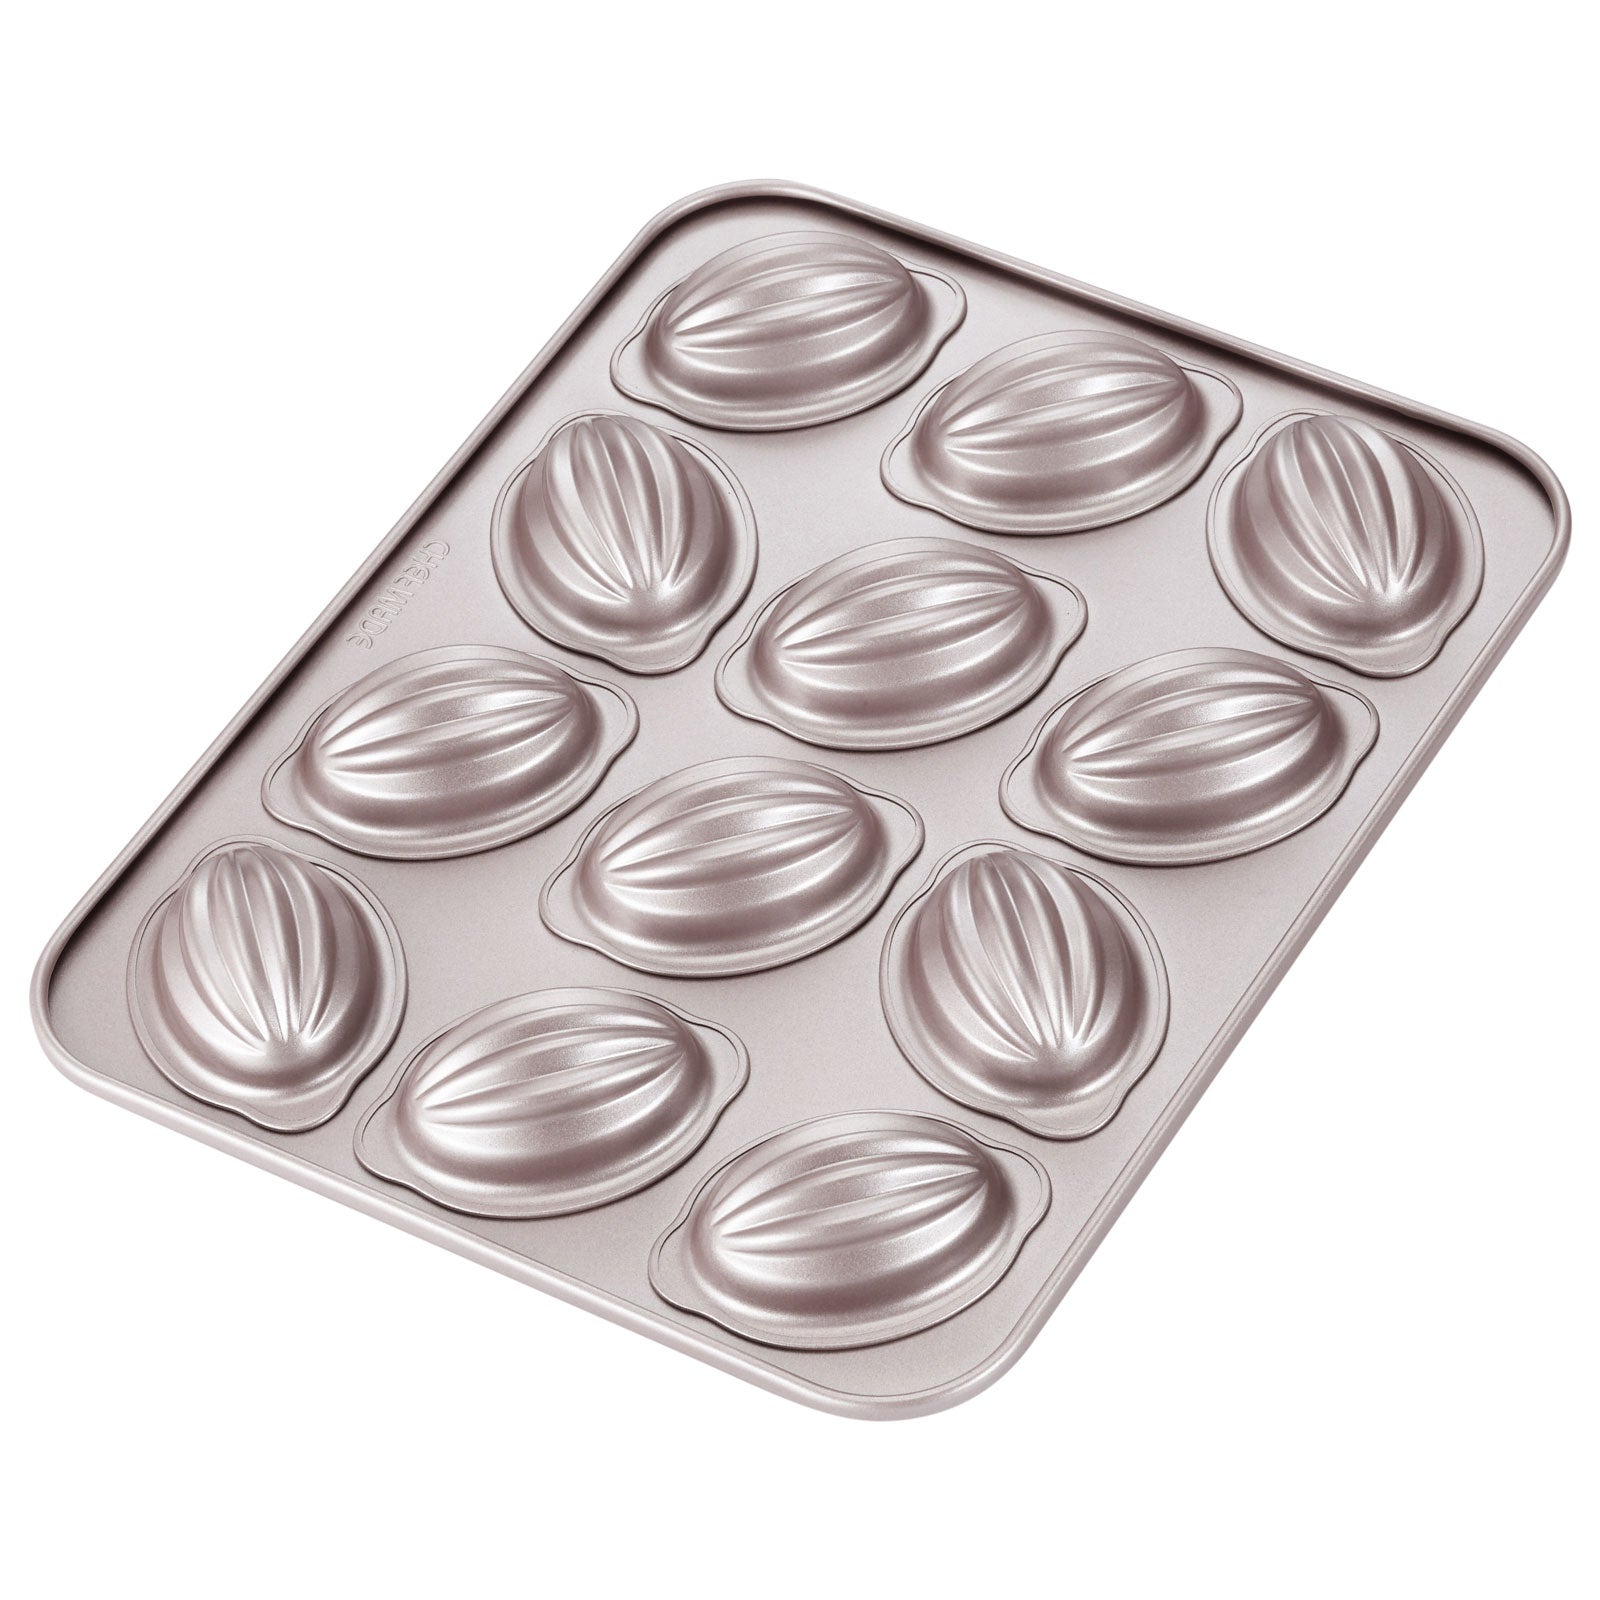 Rugby-Shaped Cake Pan 12 Well